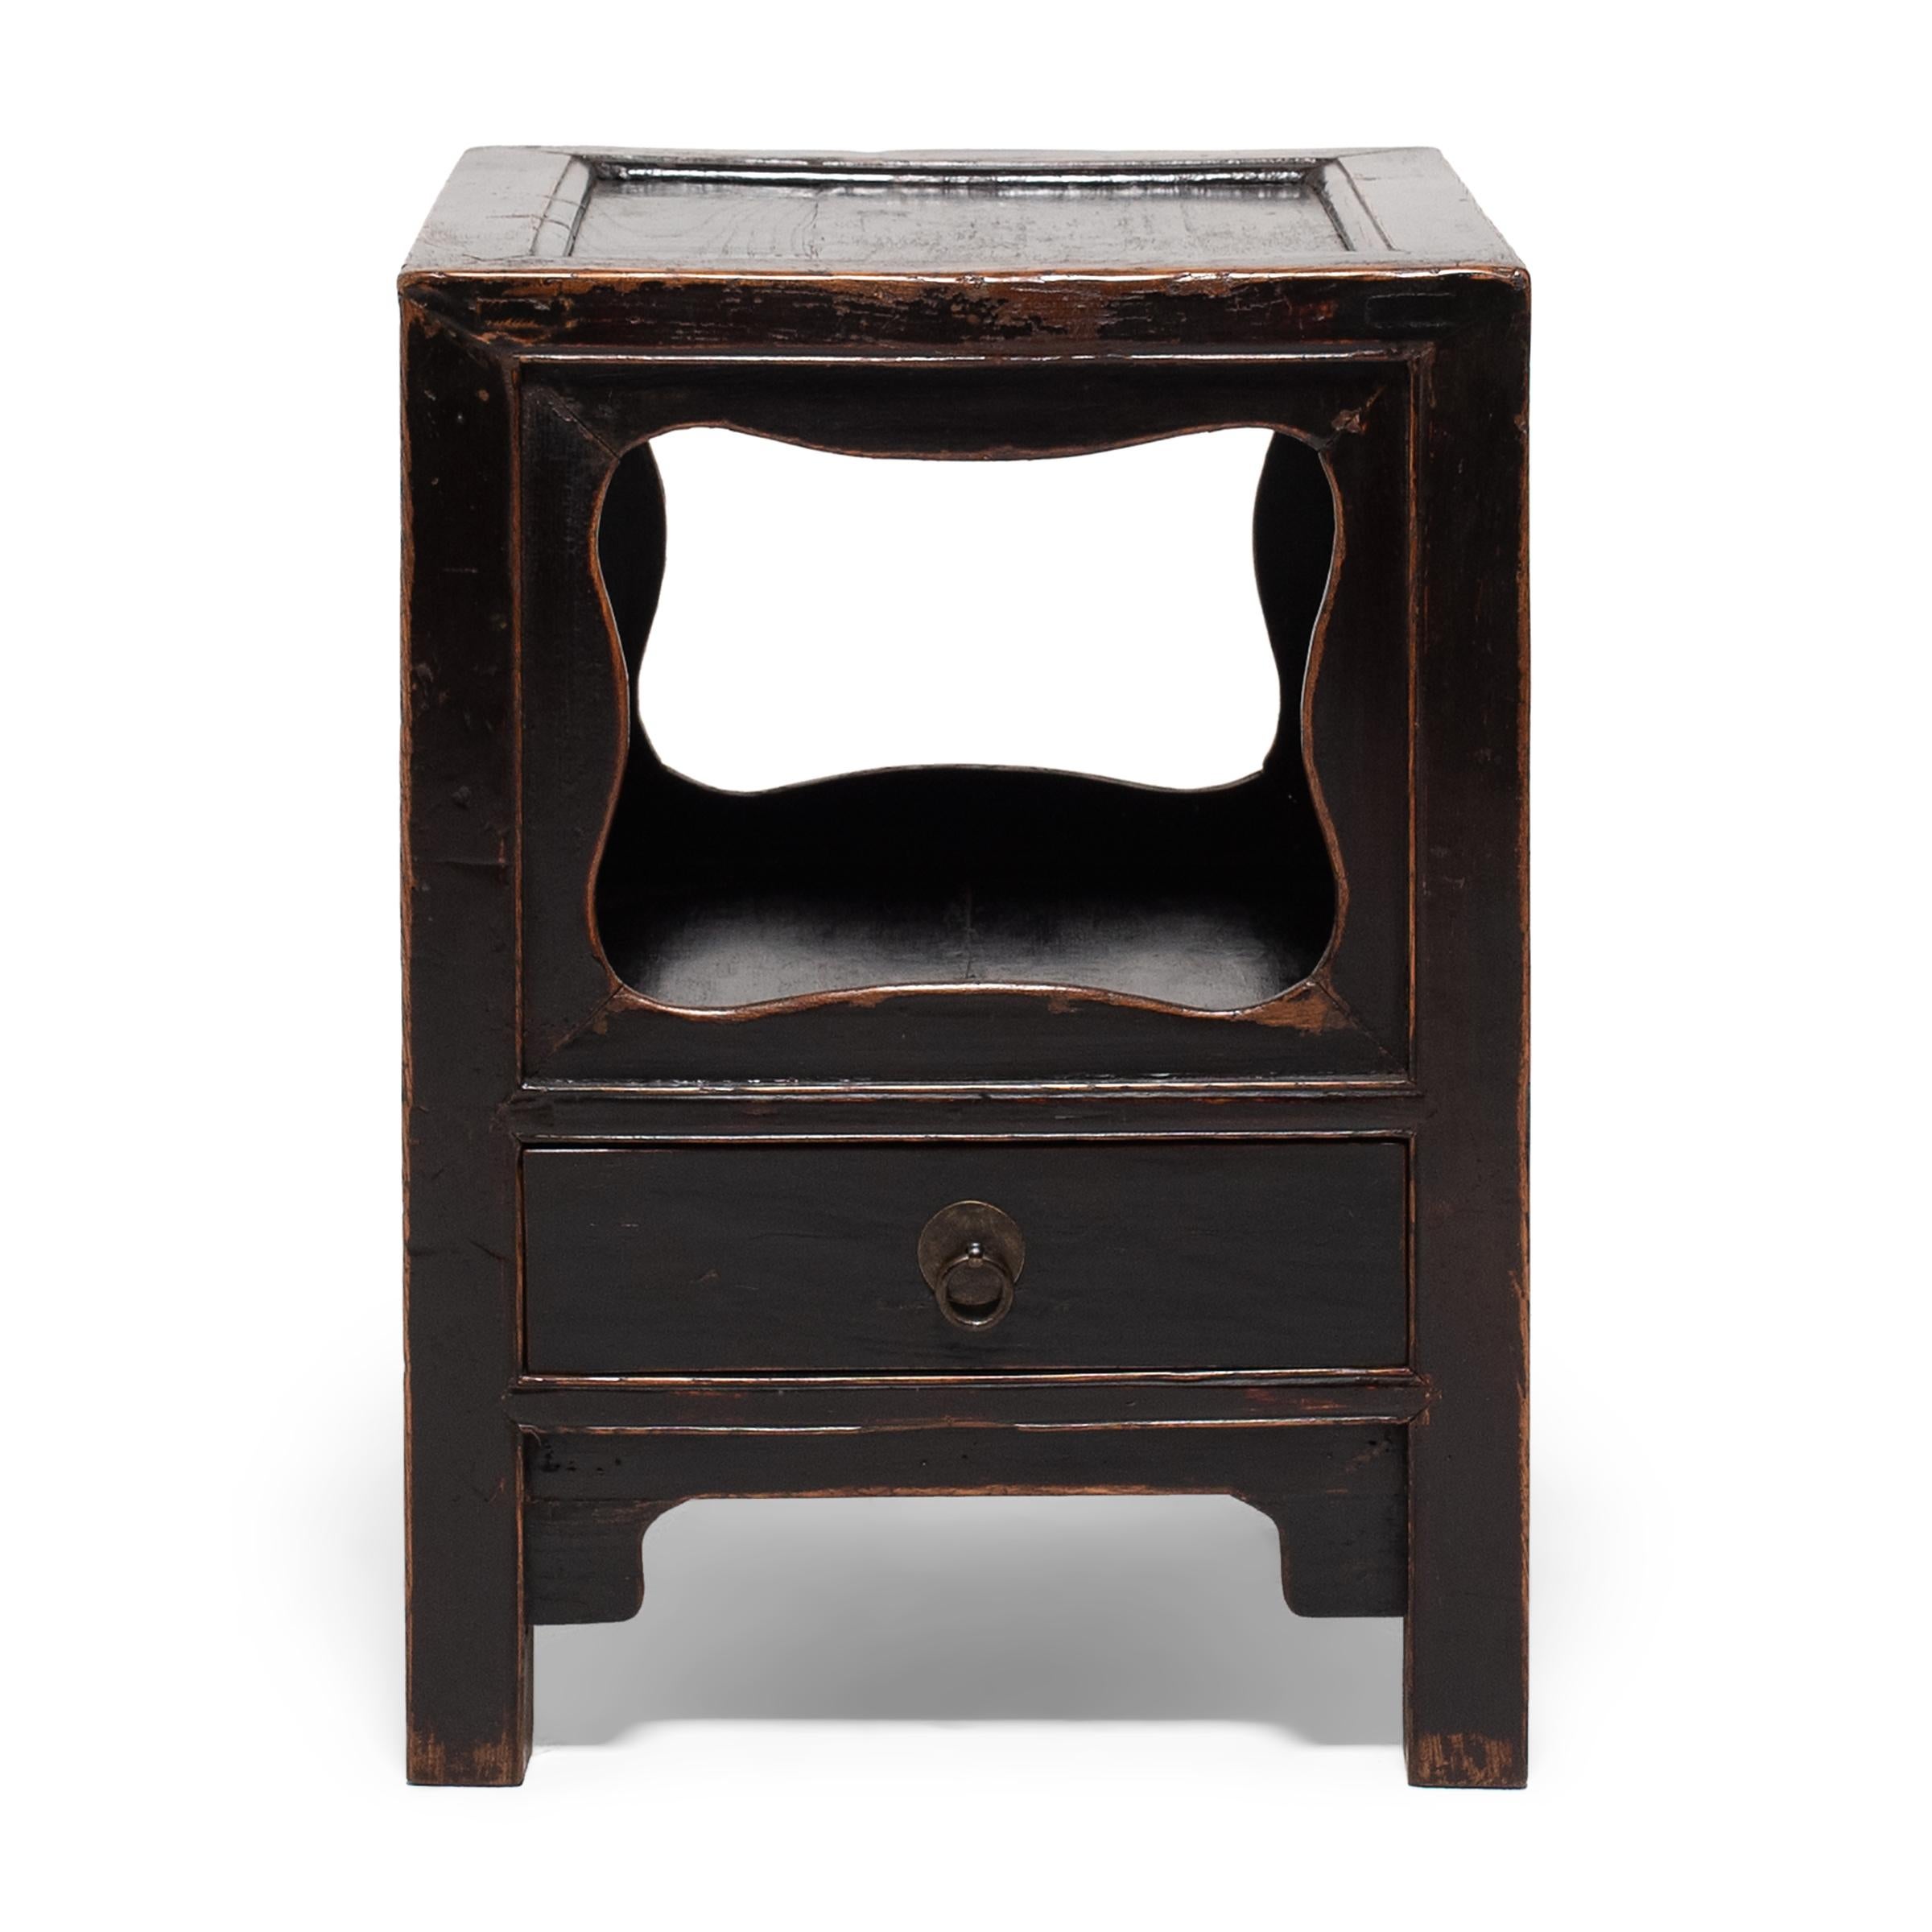 Popular throughout the Qing dynasty, display pedestals such as this were used to display precious objects, serve tea, or elevate burning incense. This square example dates to the mid-19th century and features a lower shelf enclosed on all sides by